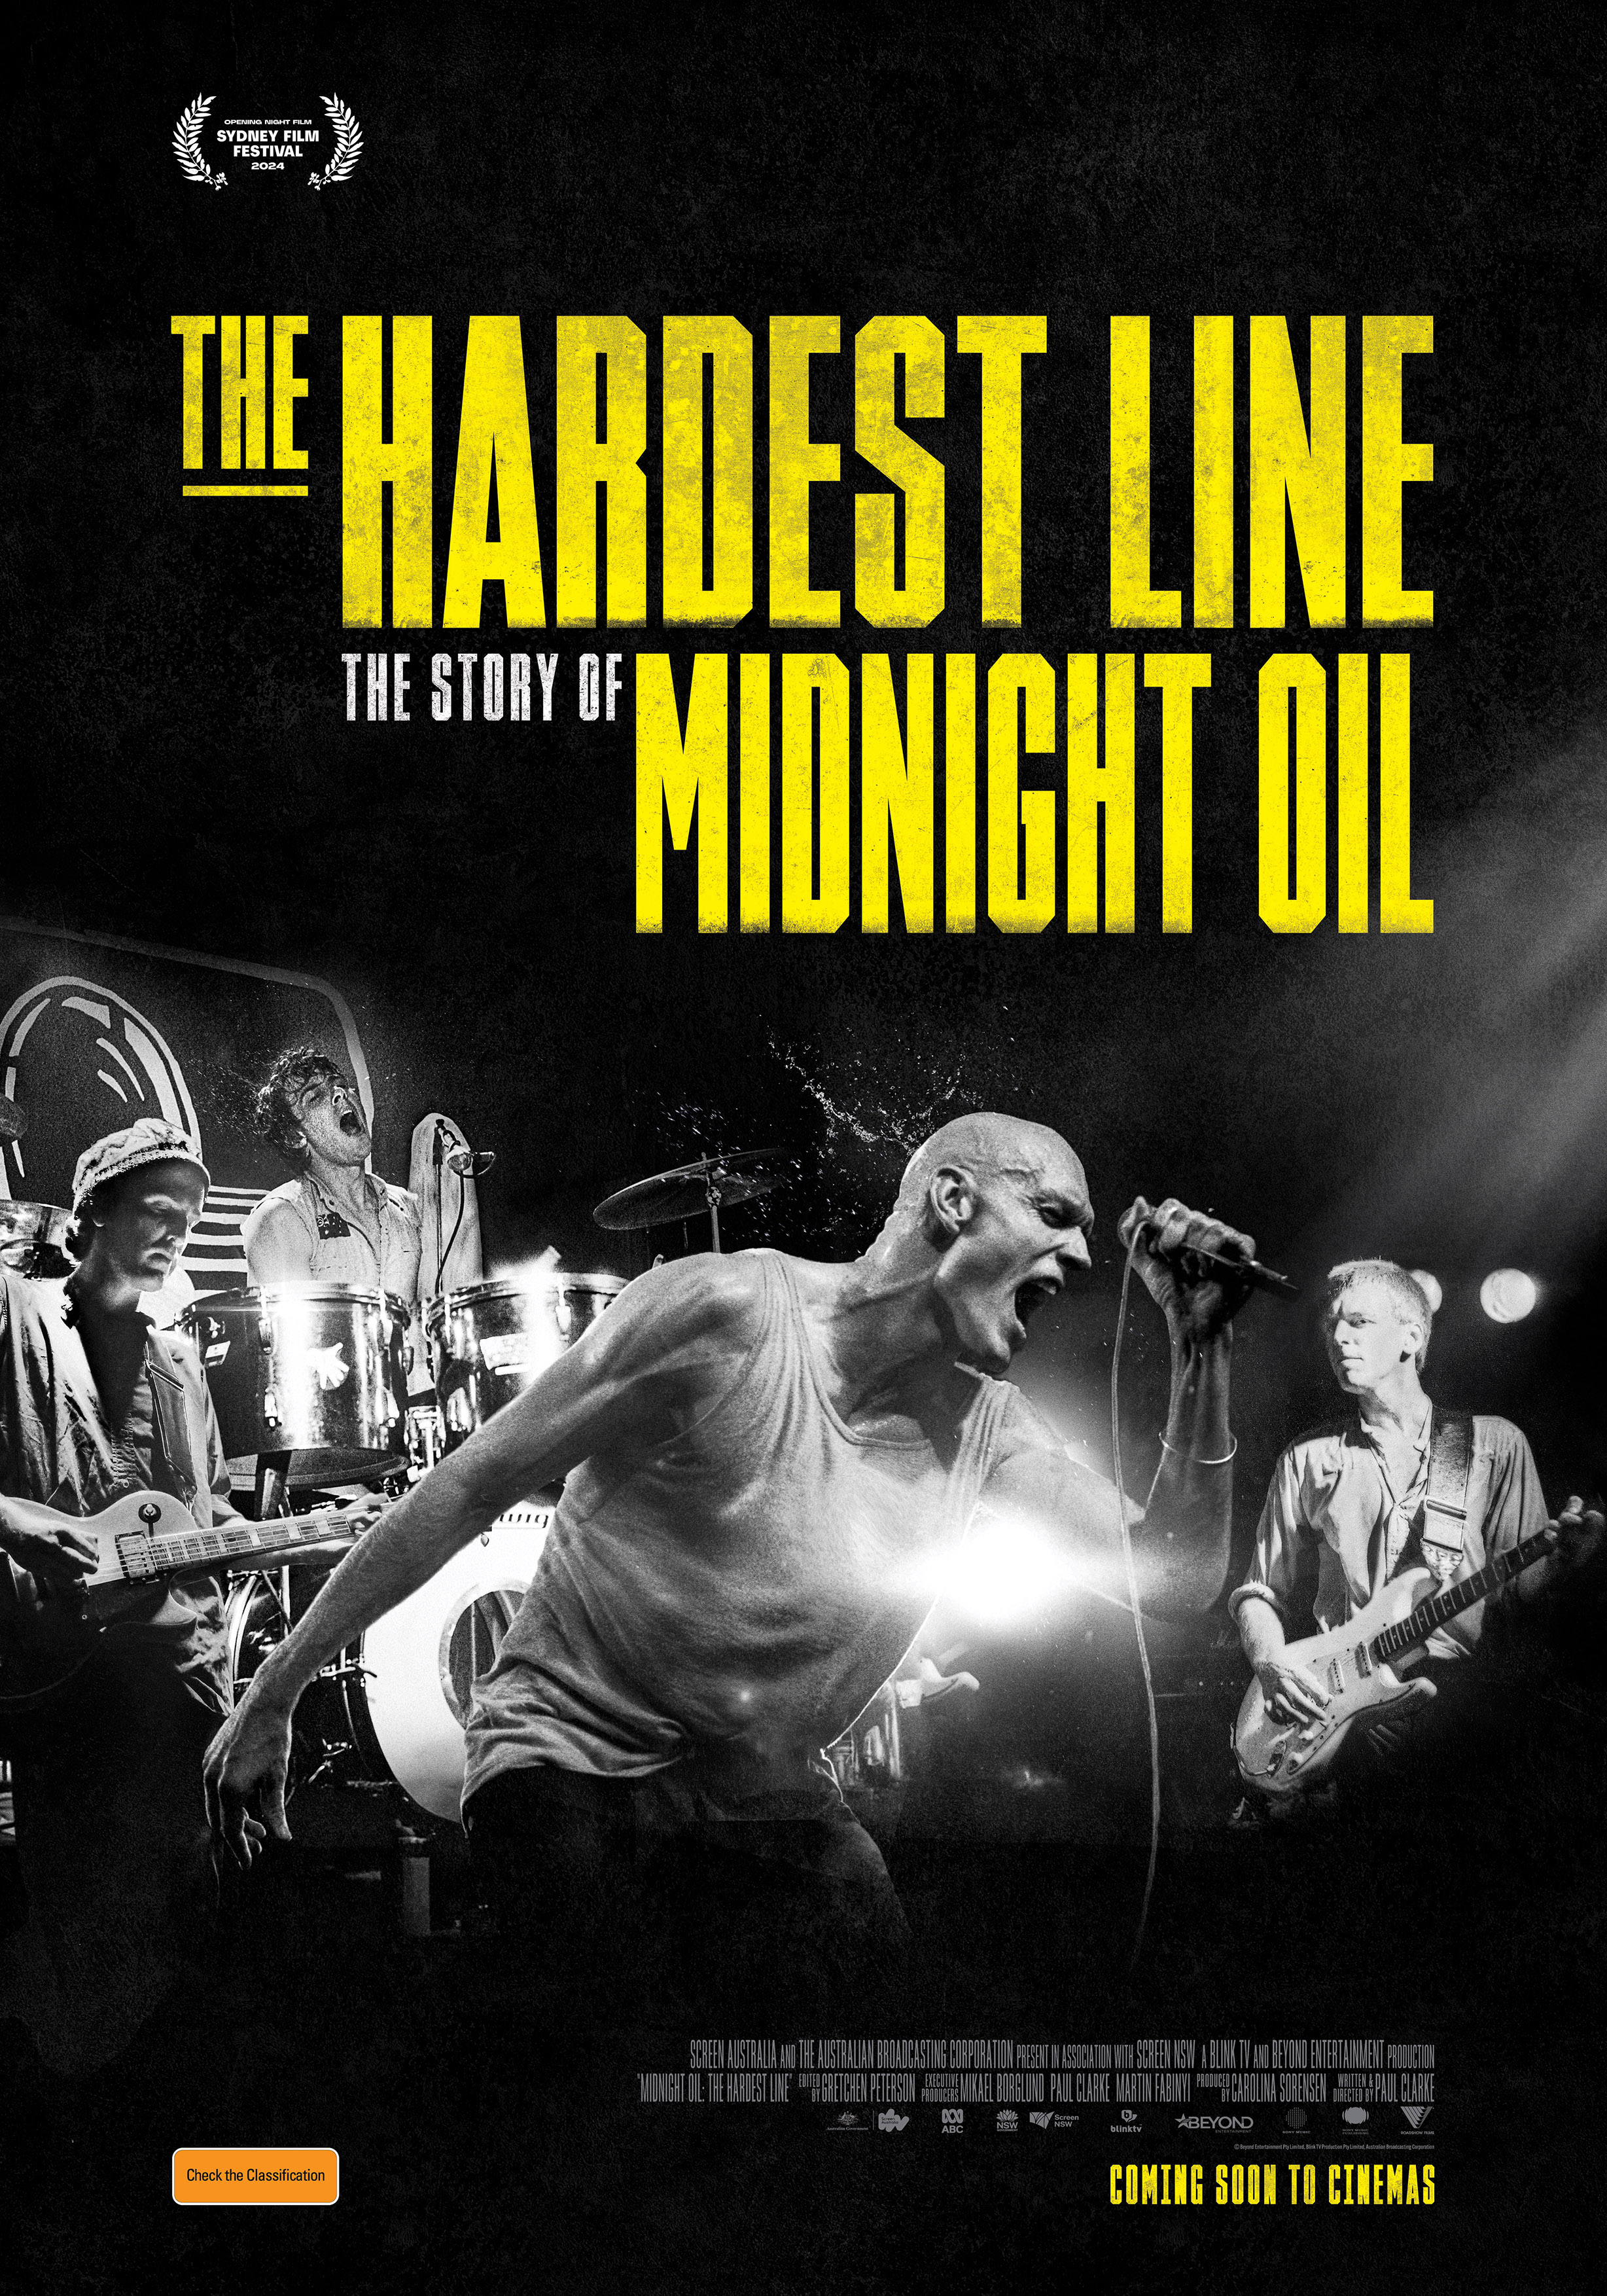 THE HARDEST LINE: THE STORY OF MIDNIGHT OIL